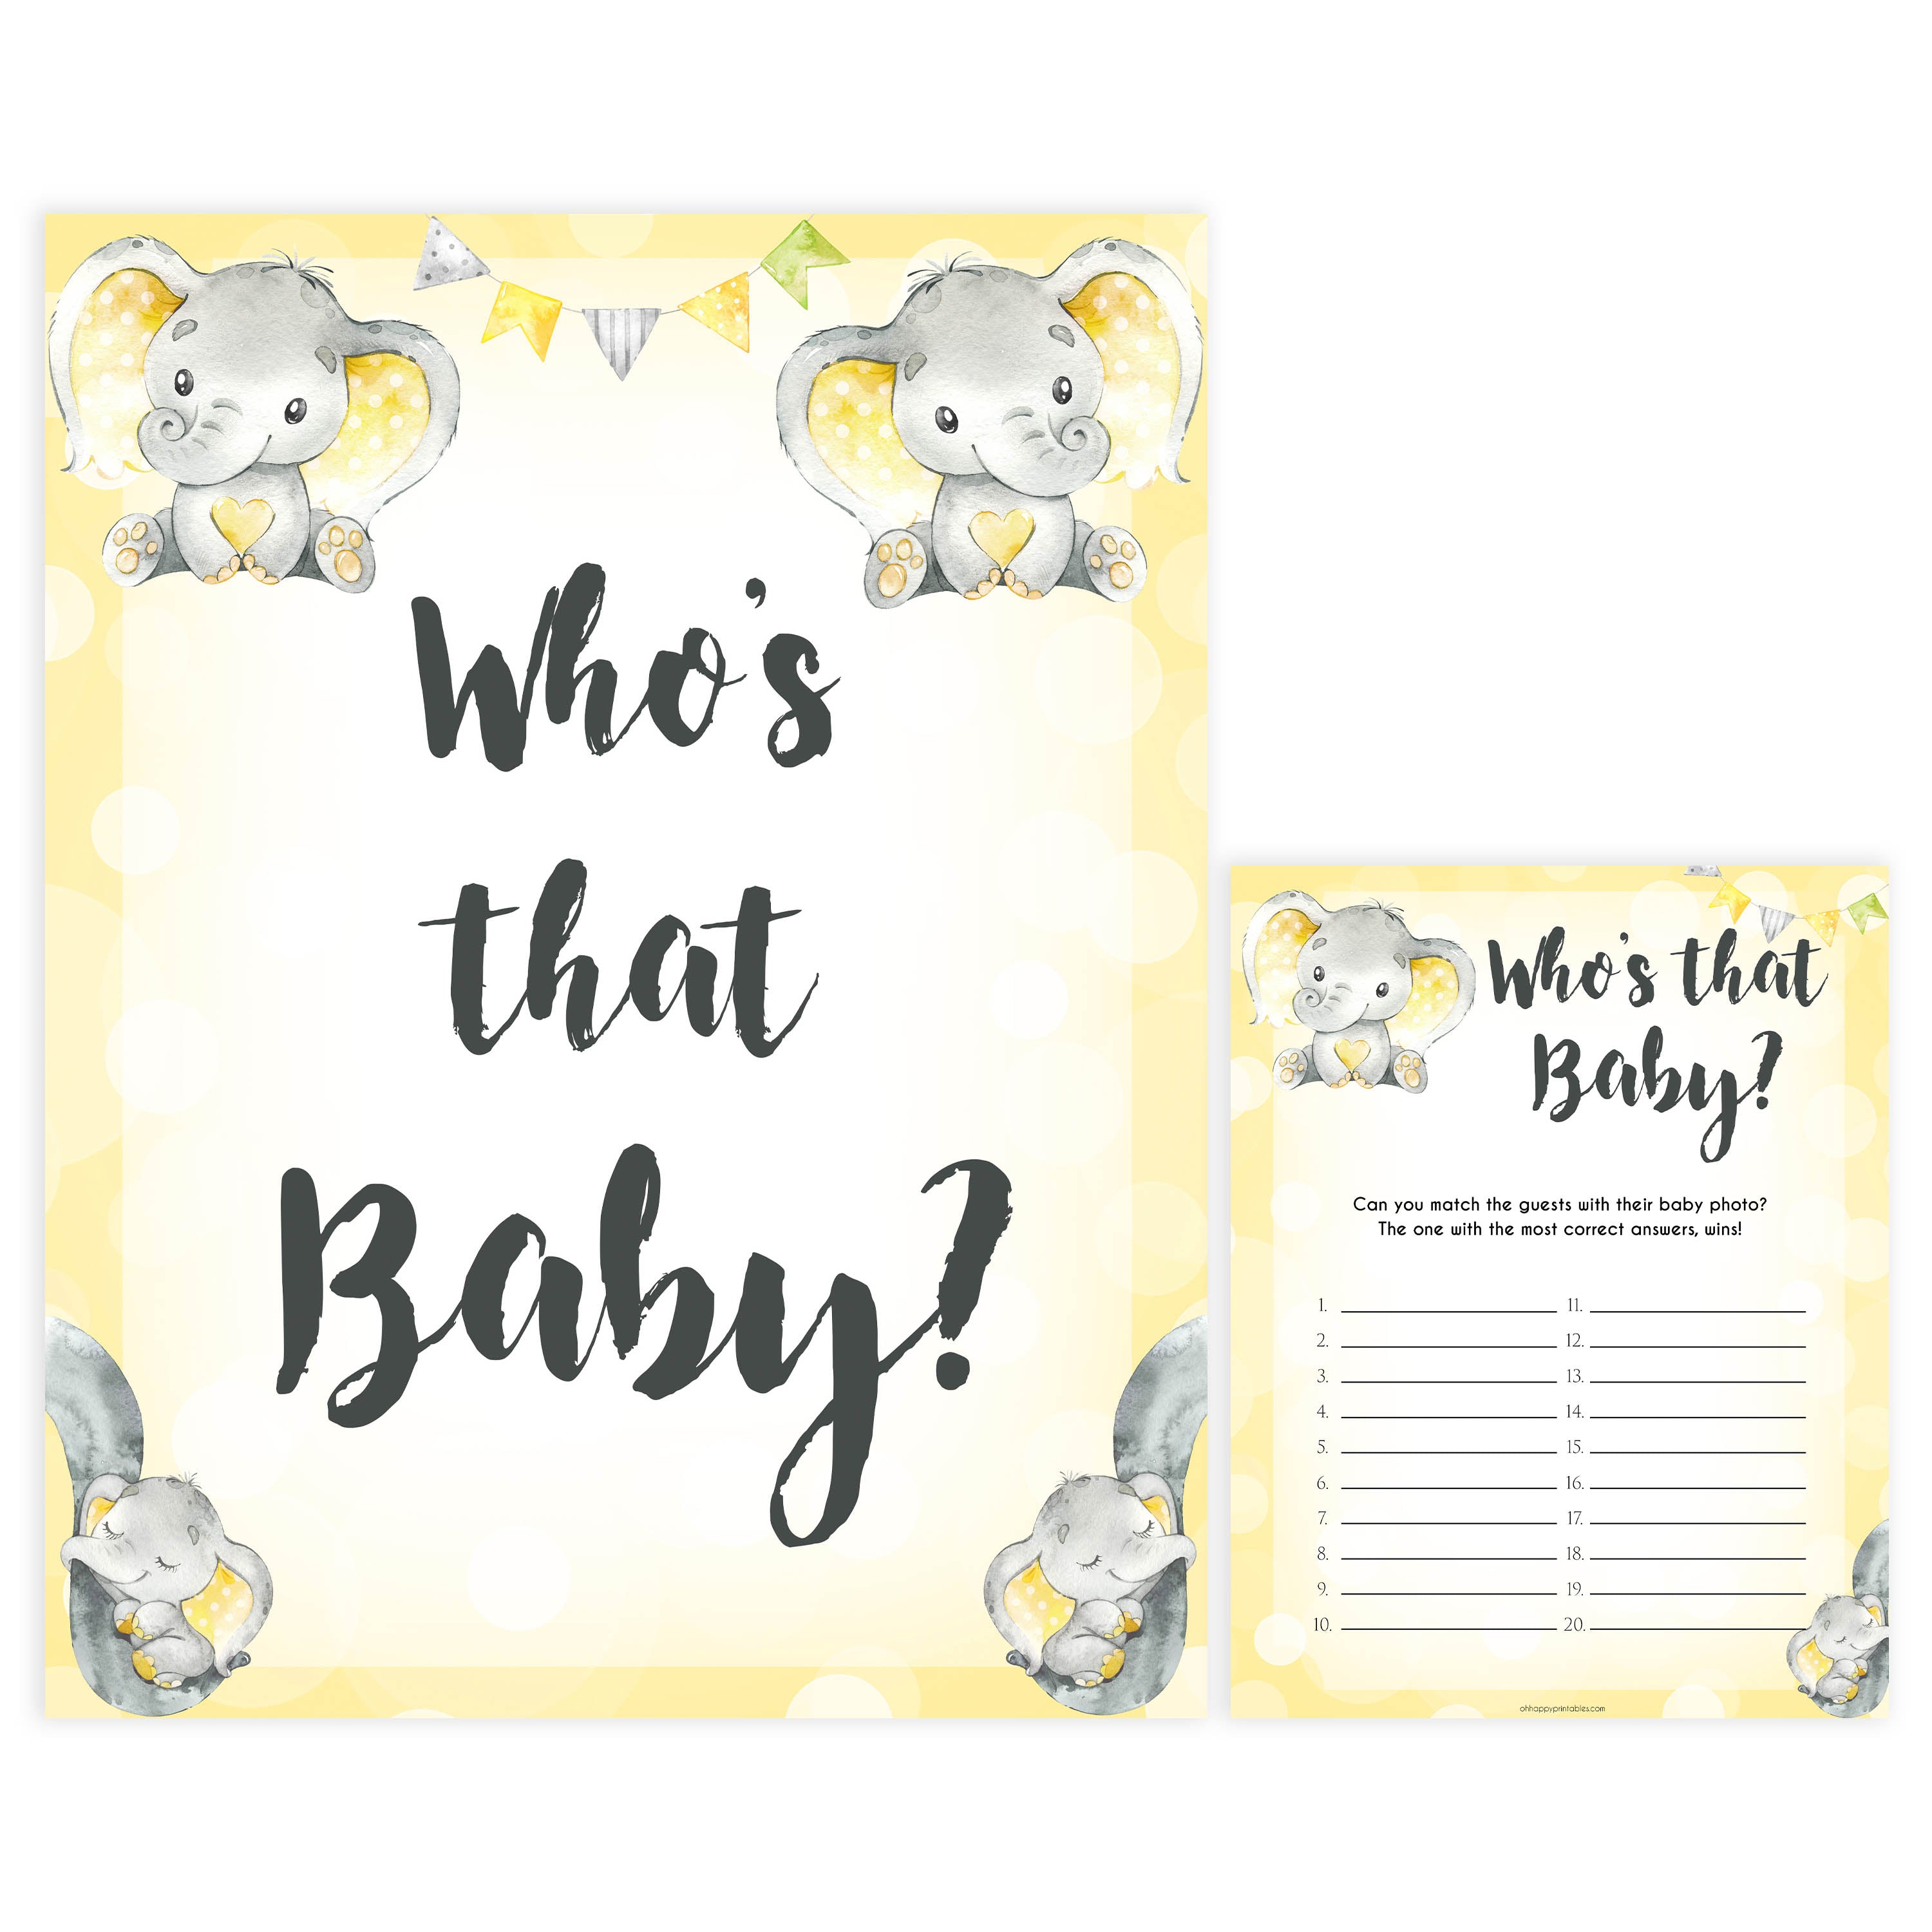 whos that baby game, guess the baby picture game, Printable baby shower games, fun baby games, baby shower games, fun baby shower ideas, top baby shower ideas, yellow elephant baby shower, blue baby shower ideas